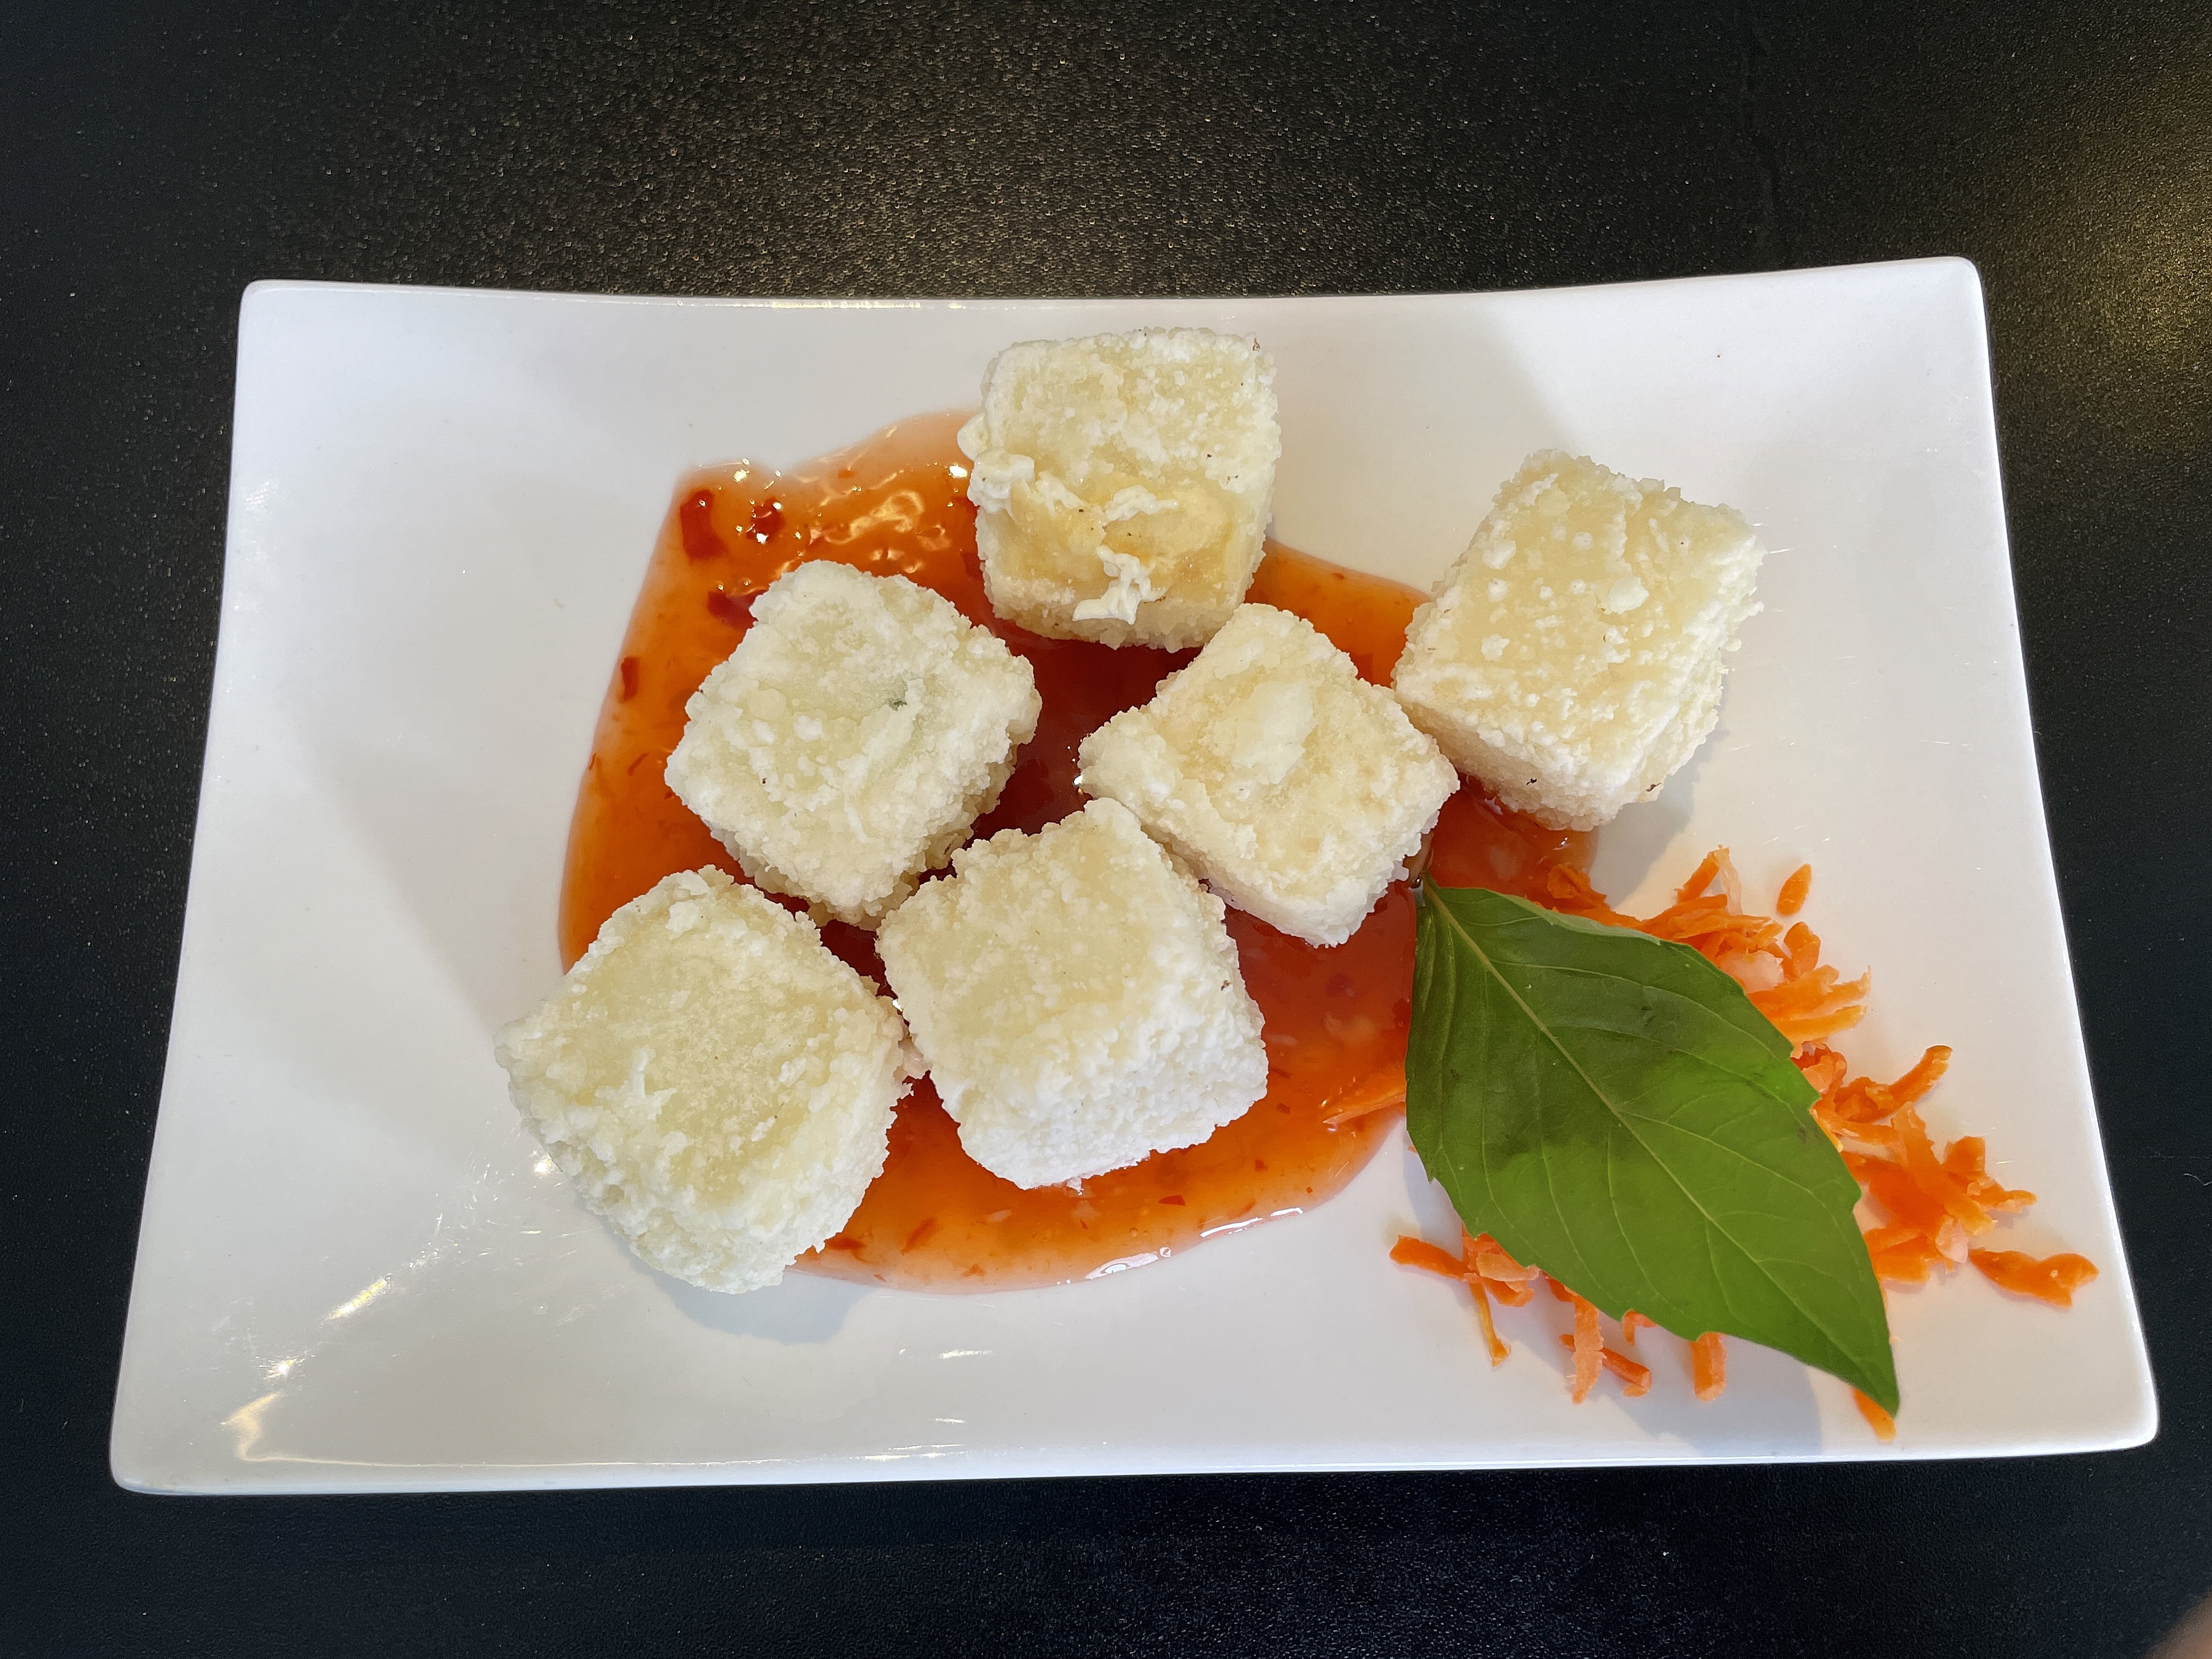 How do they keep deep-fried cubes of shattering crisp tofu so pure white? The server wouldn't give up the secret.